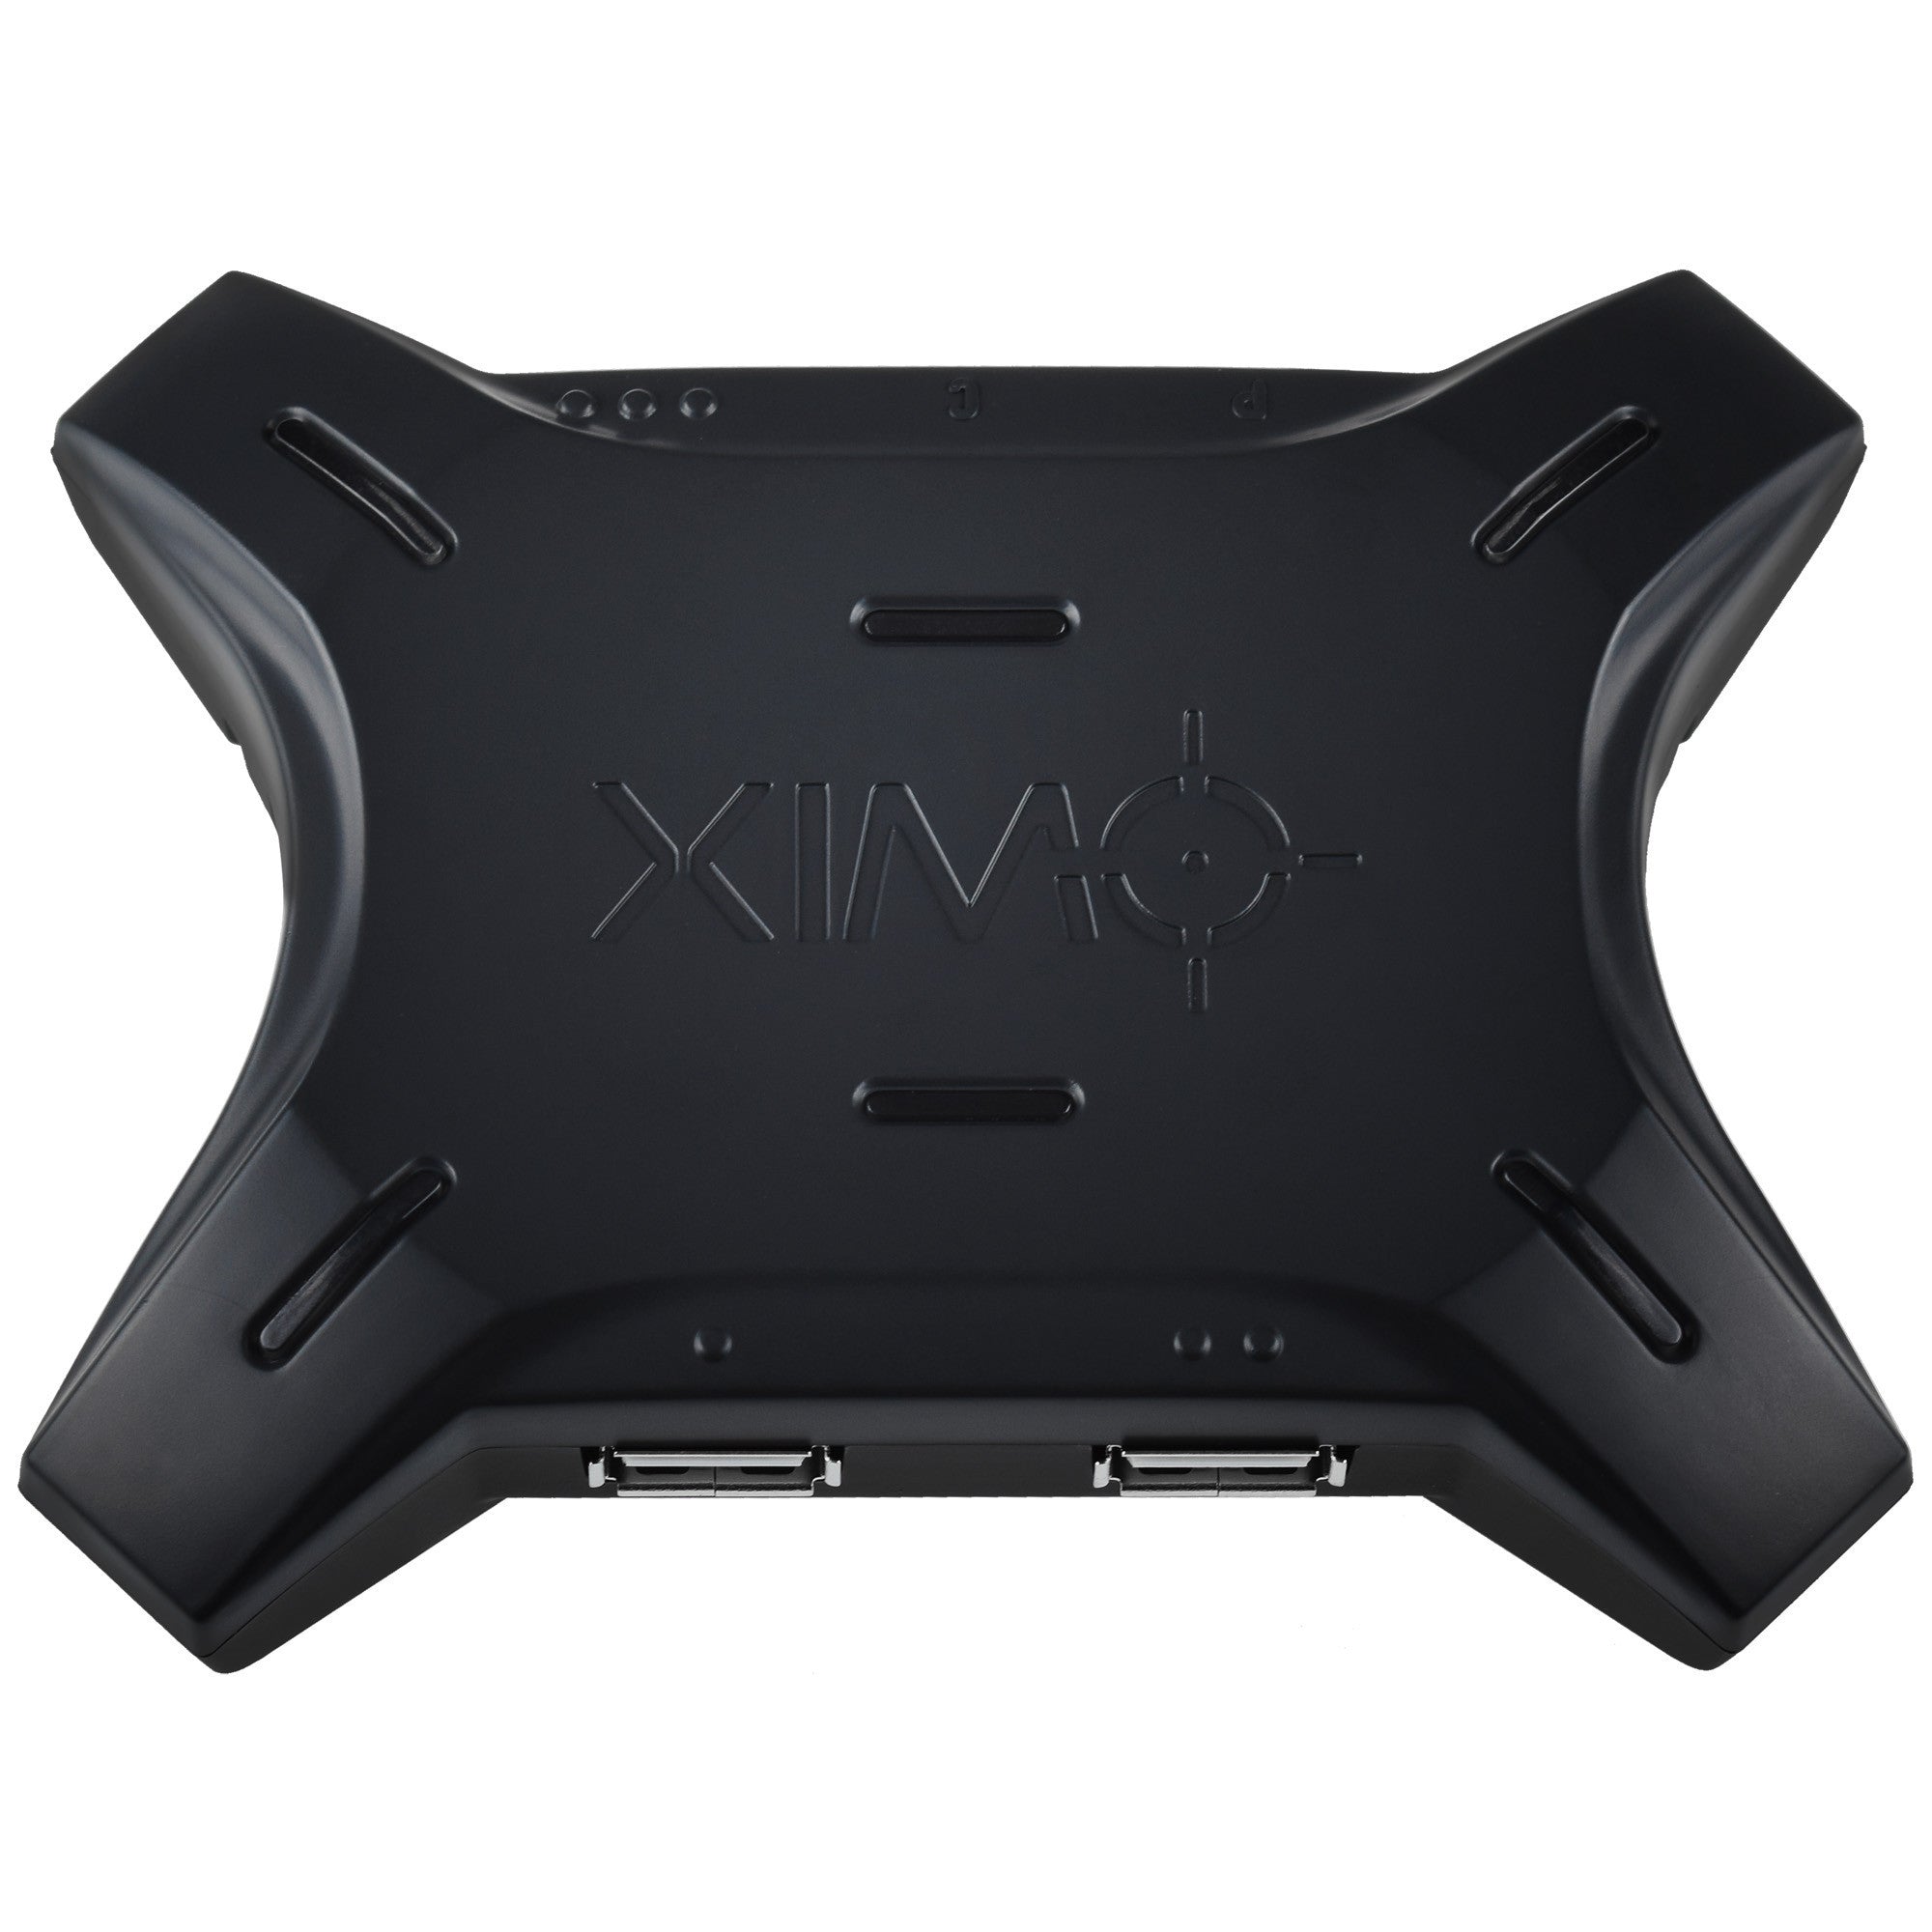 XIM Apex - Keyboard and Mouse Adapter (for PS4, PS3, Xbox One, Xbox 360)  Japan